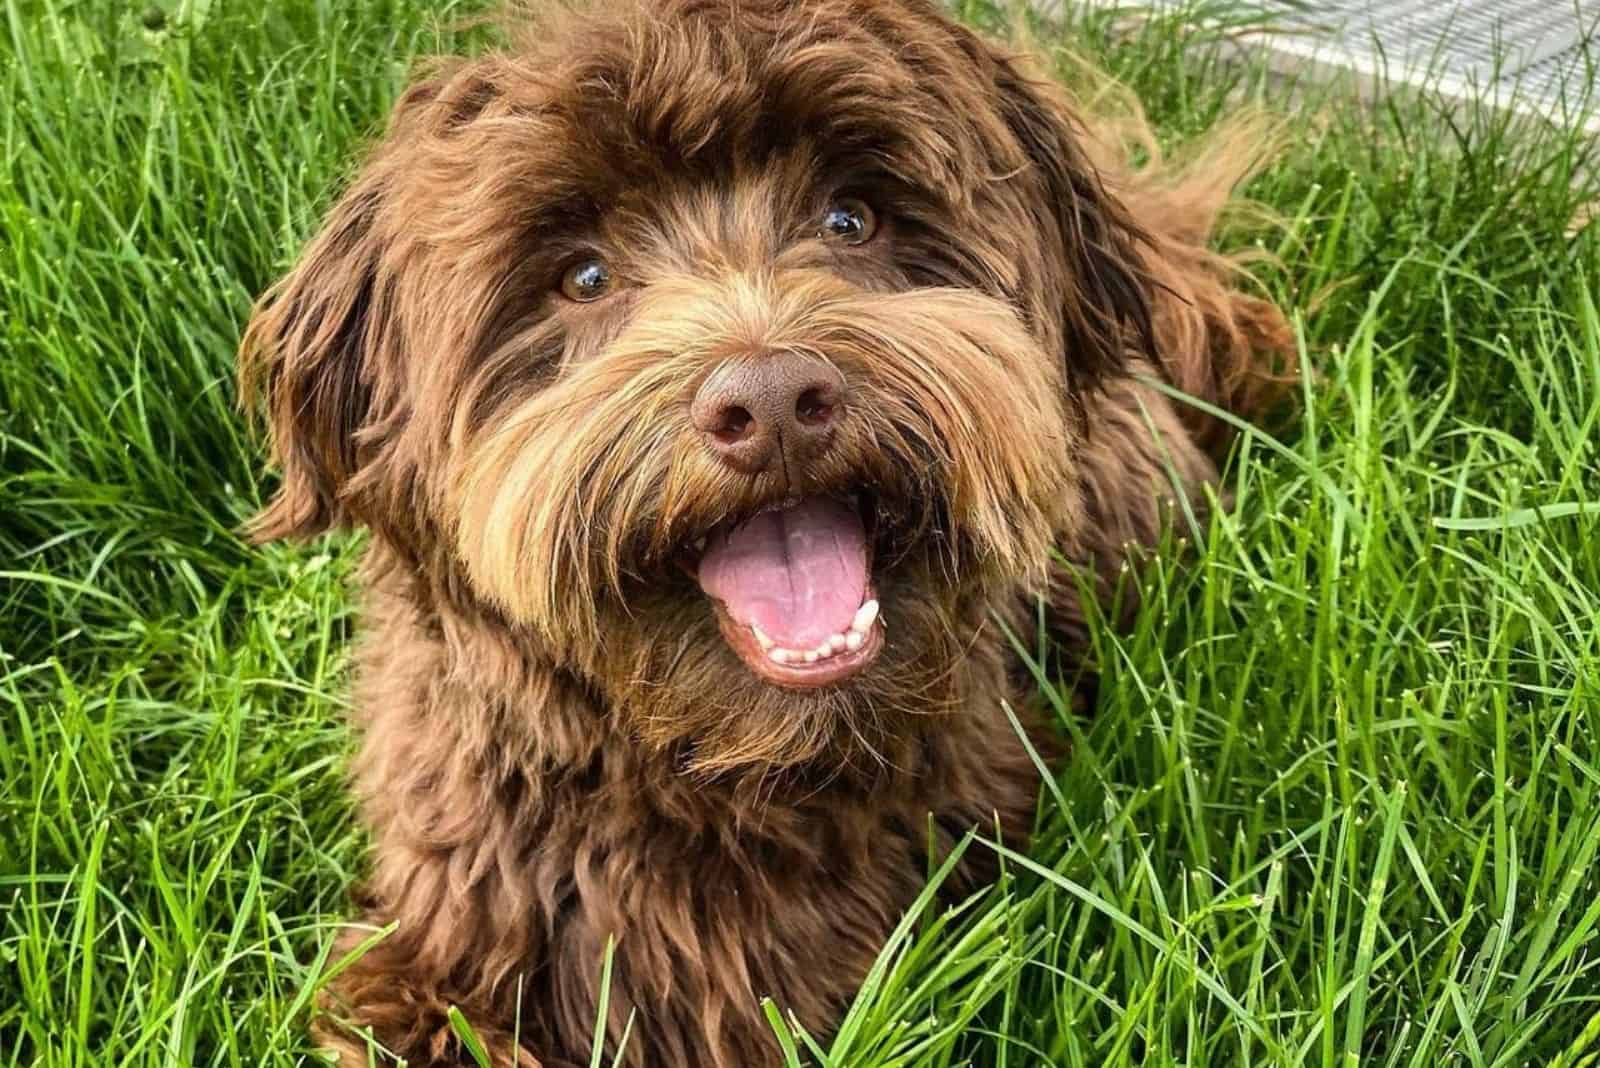 All About Chocolate Havanese – Are These Dogs Healthy?